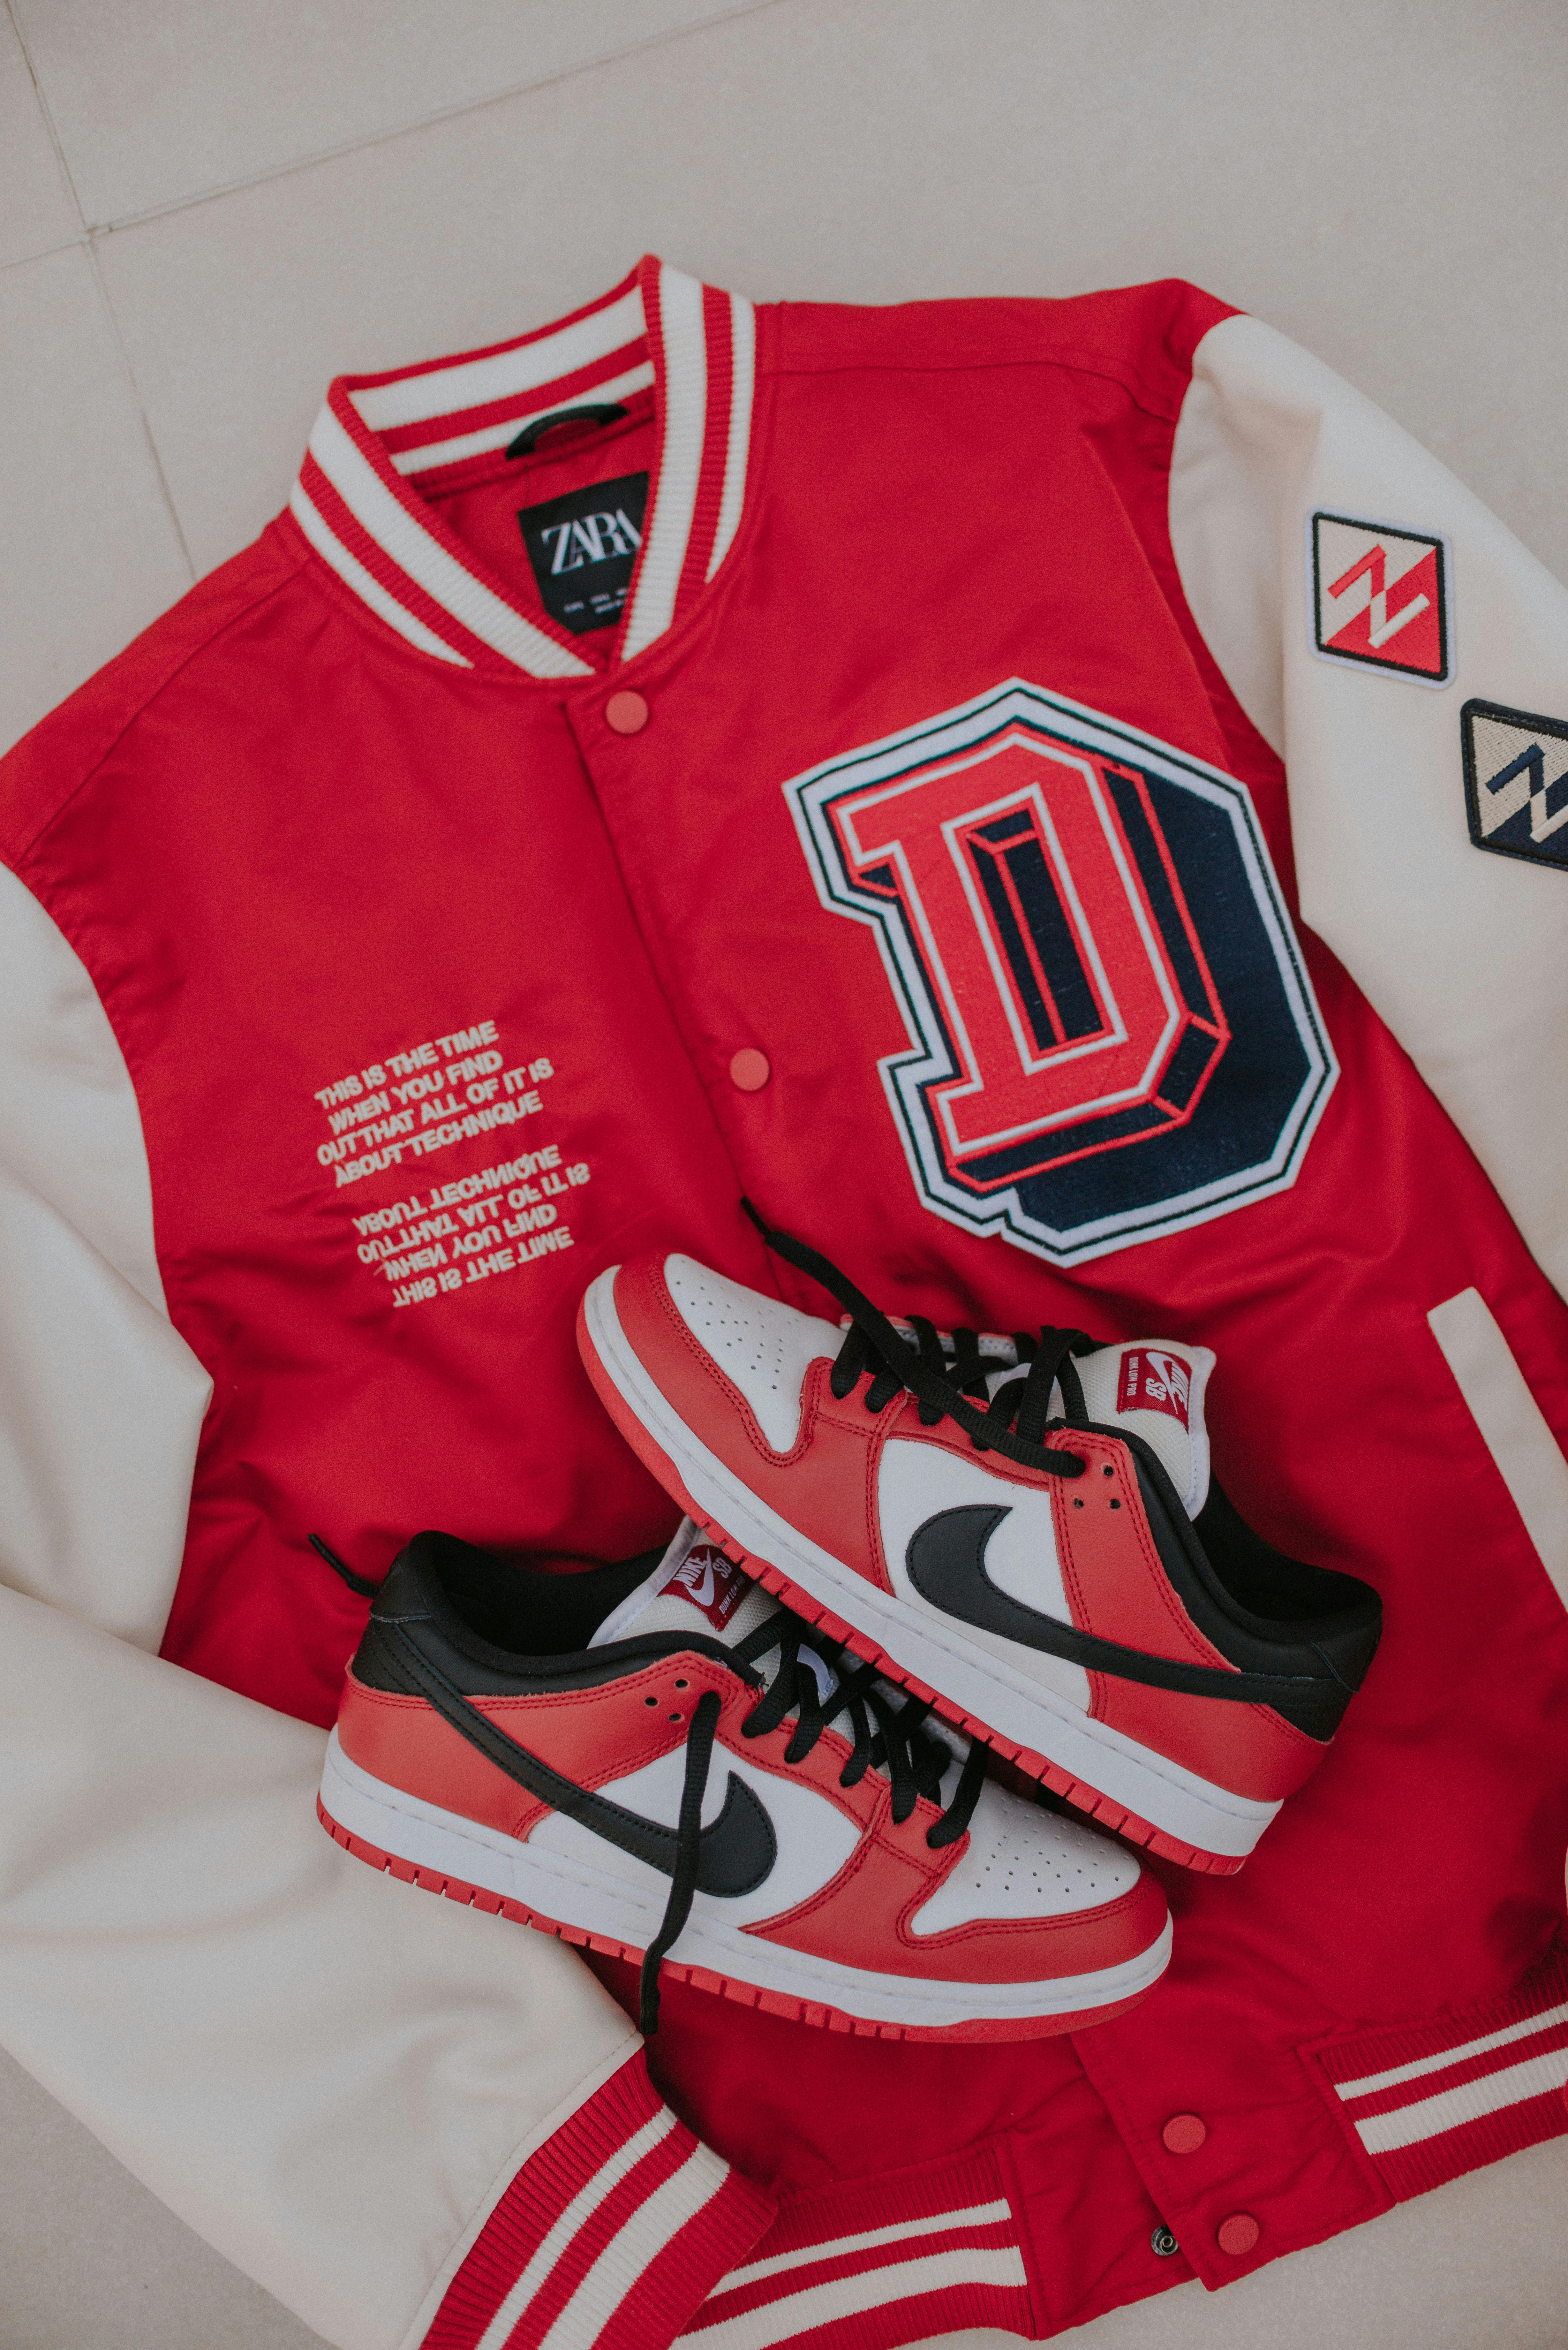 red and white varsity jacket and nike air jordan shoes